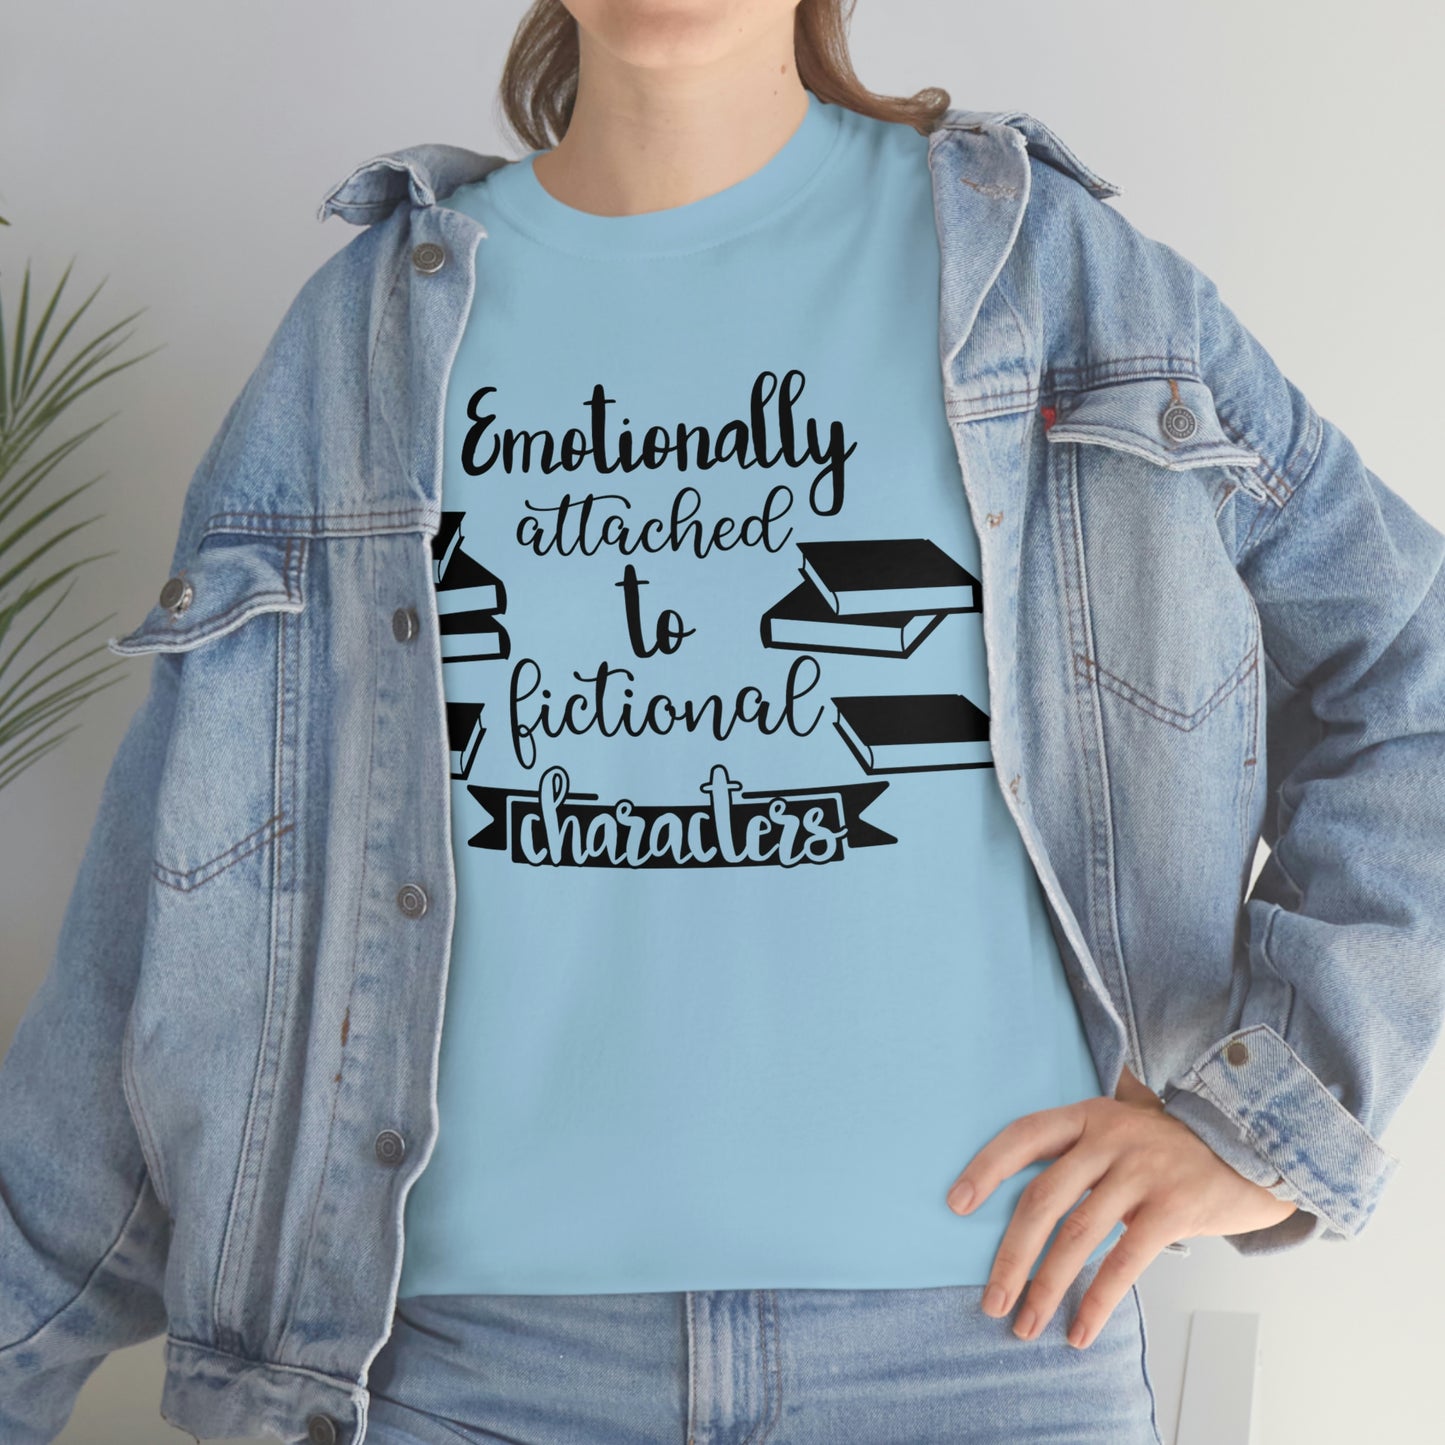 Emotionally Attached Cotton Tee